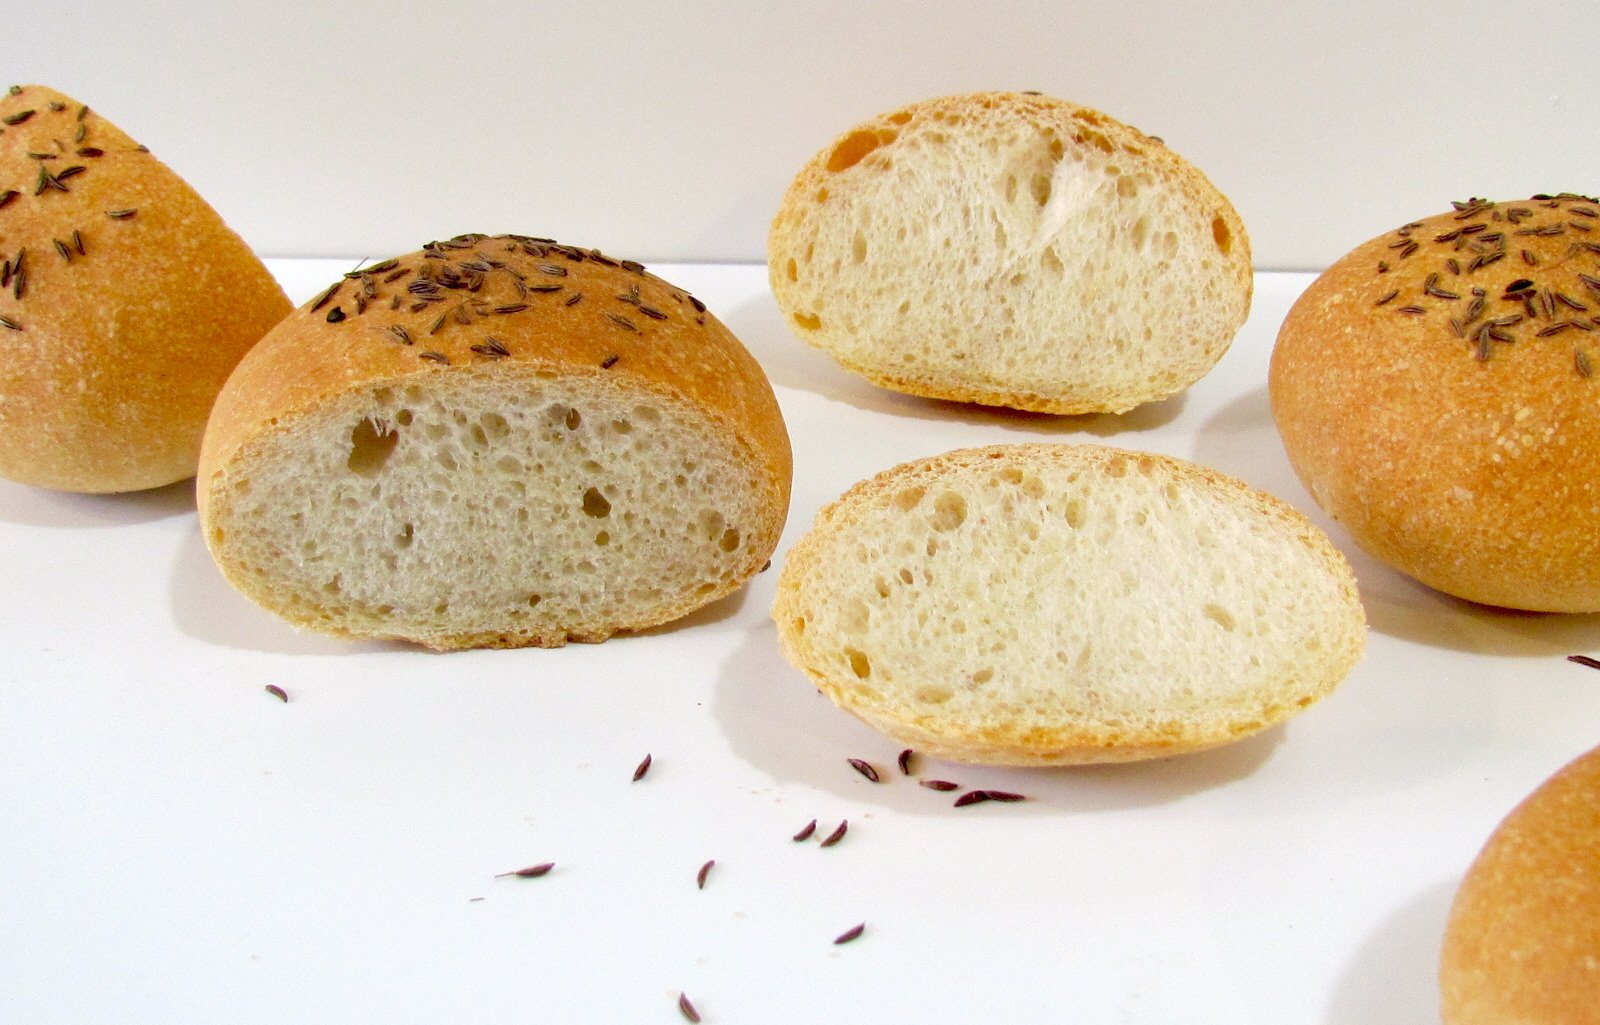 Buns with caraway seeds according to GOST (oven)